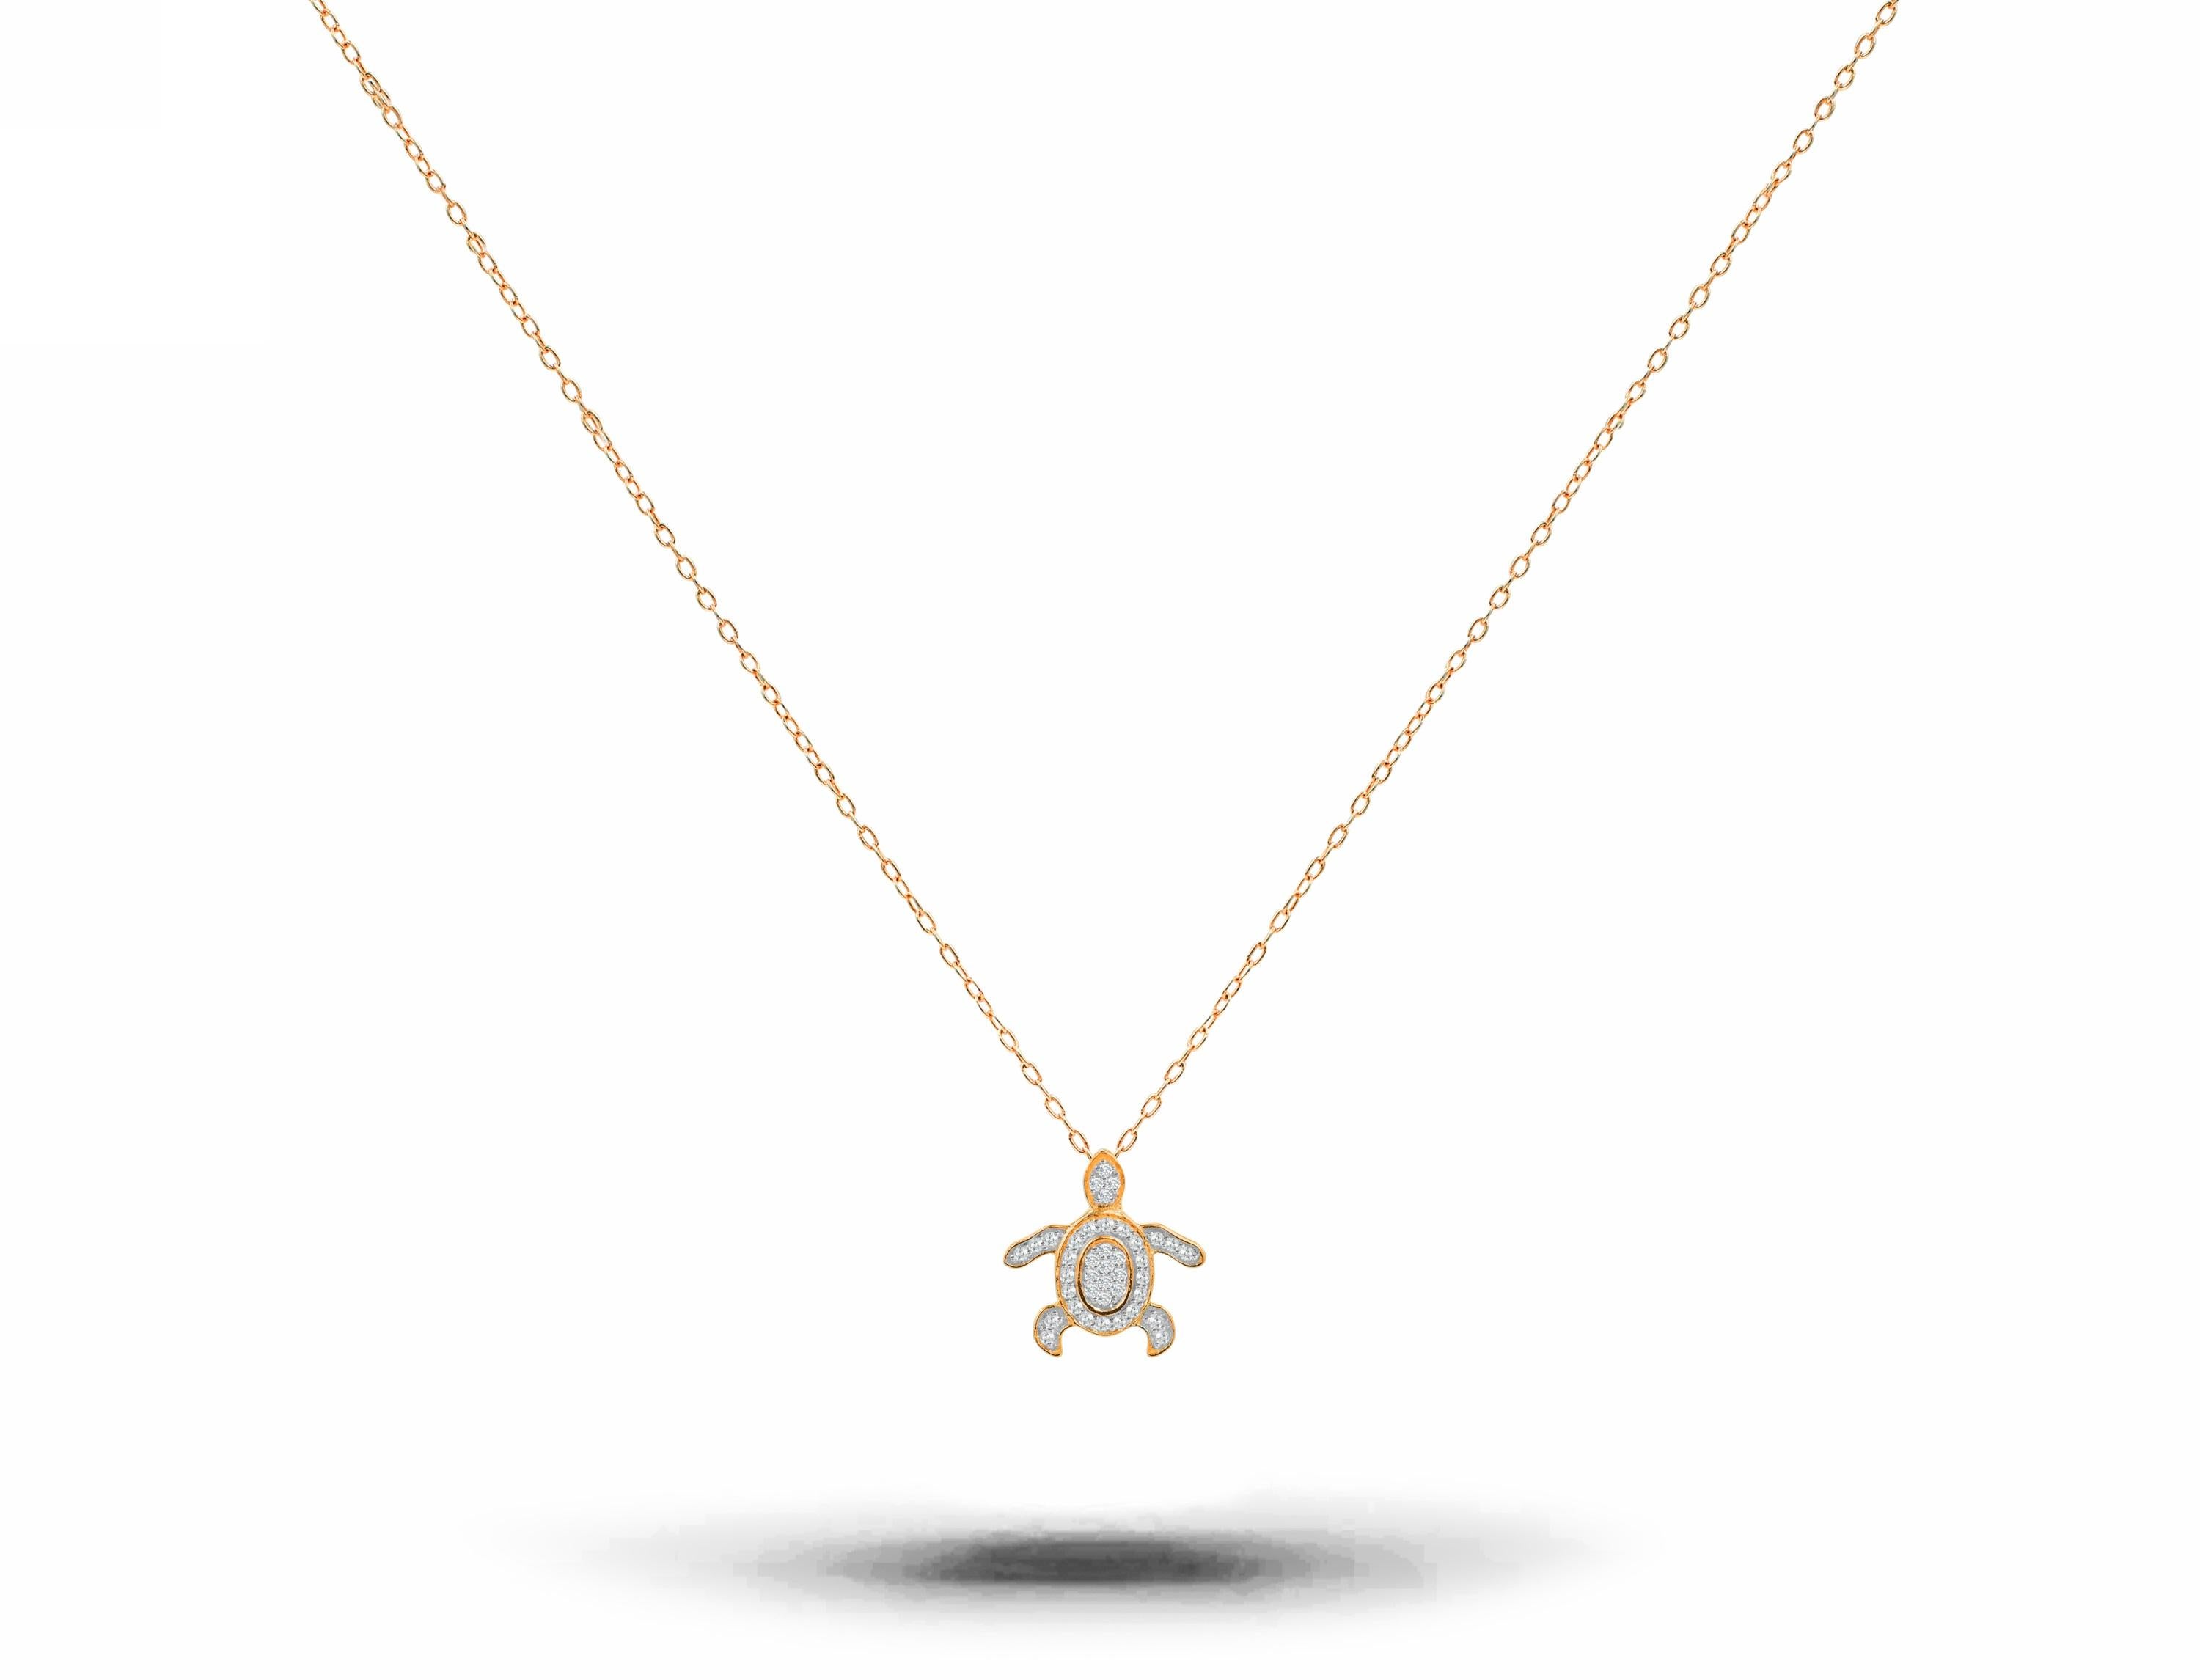 Delicate Dainty Turtle Charm Necklace with natural diamond is made of 18k solid gold.
Available in three colors of gold: White Gold / Rose Gold / Yellow Gold.

Lightweight and gorgeous natural genuine round cut diamond. Each diamond is hand selected